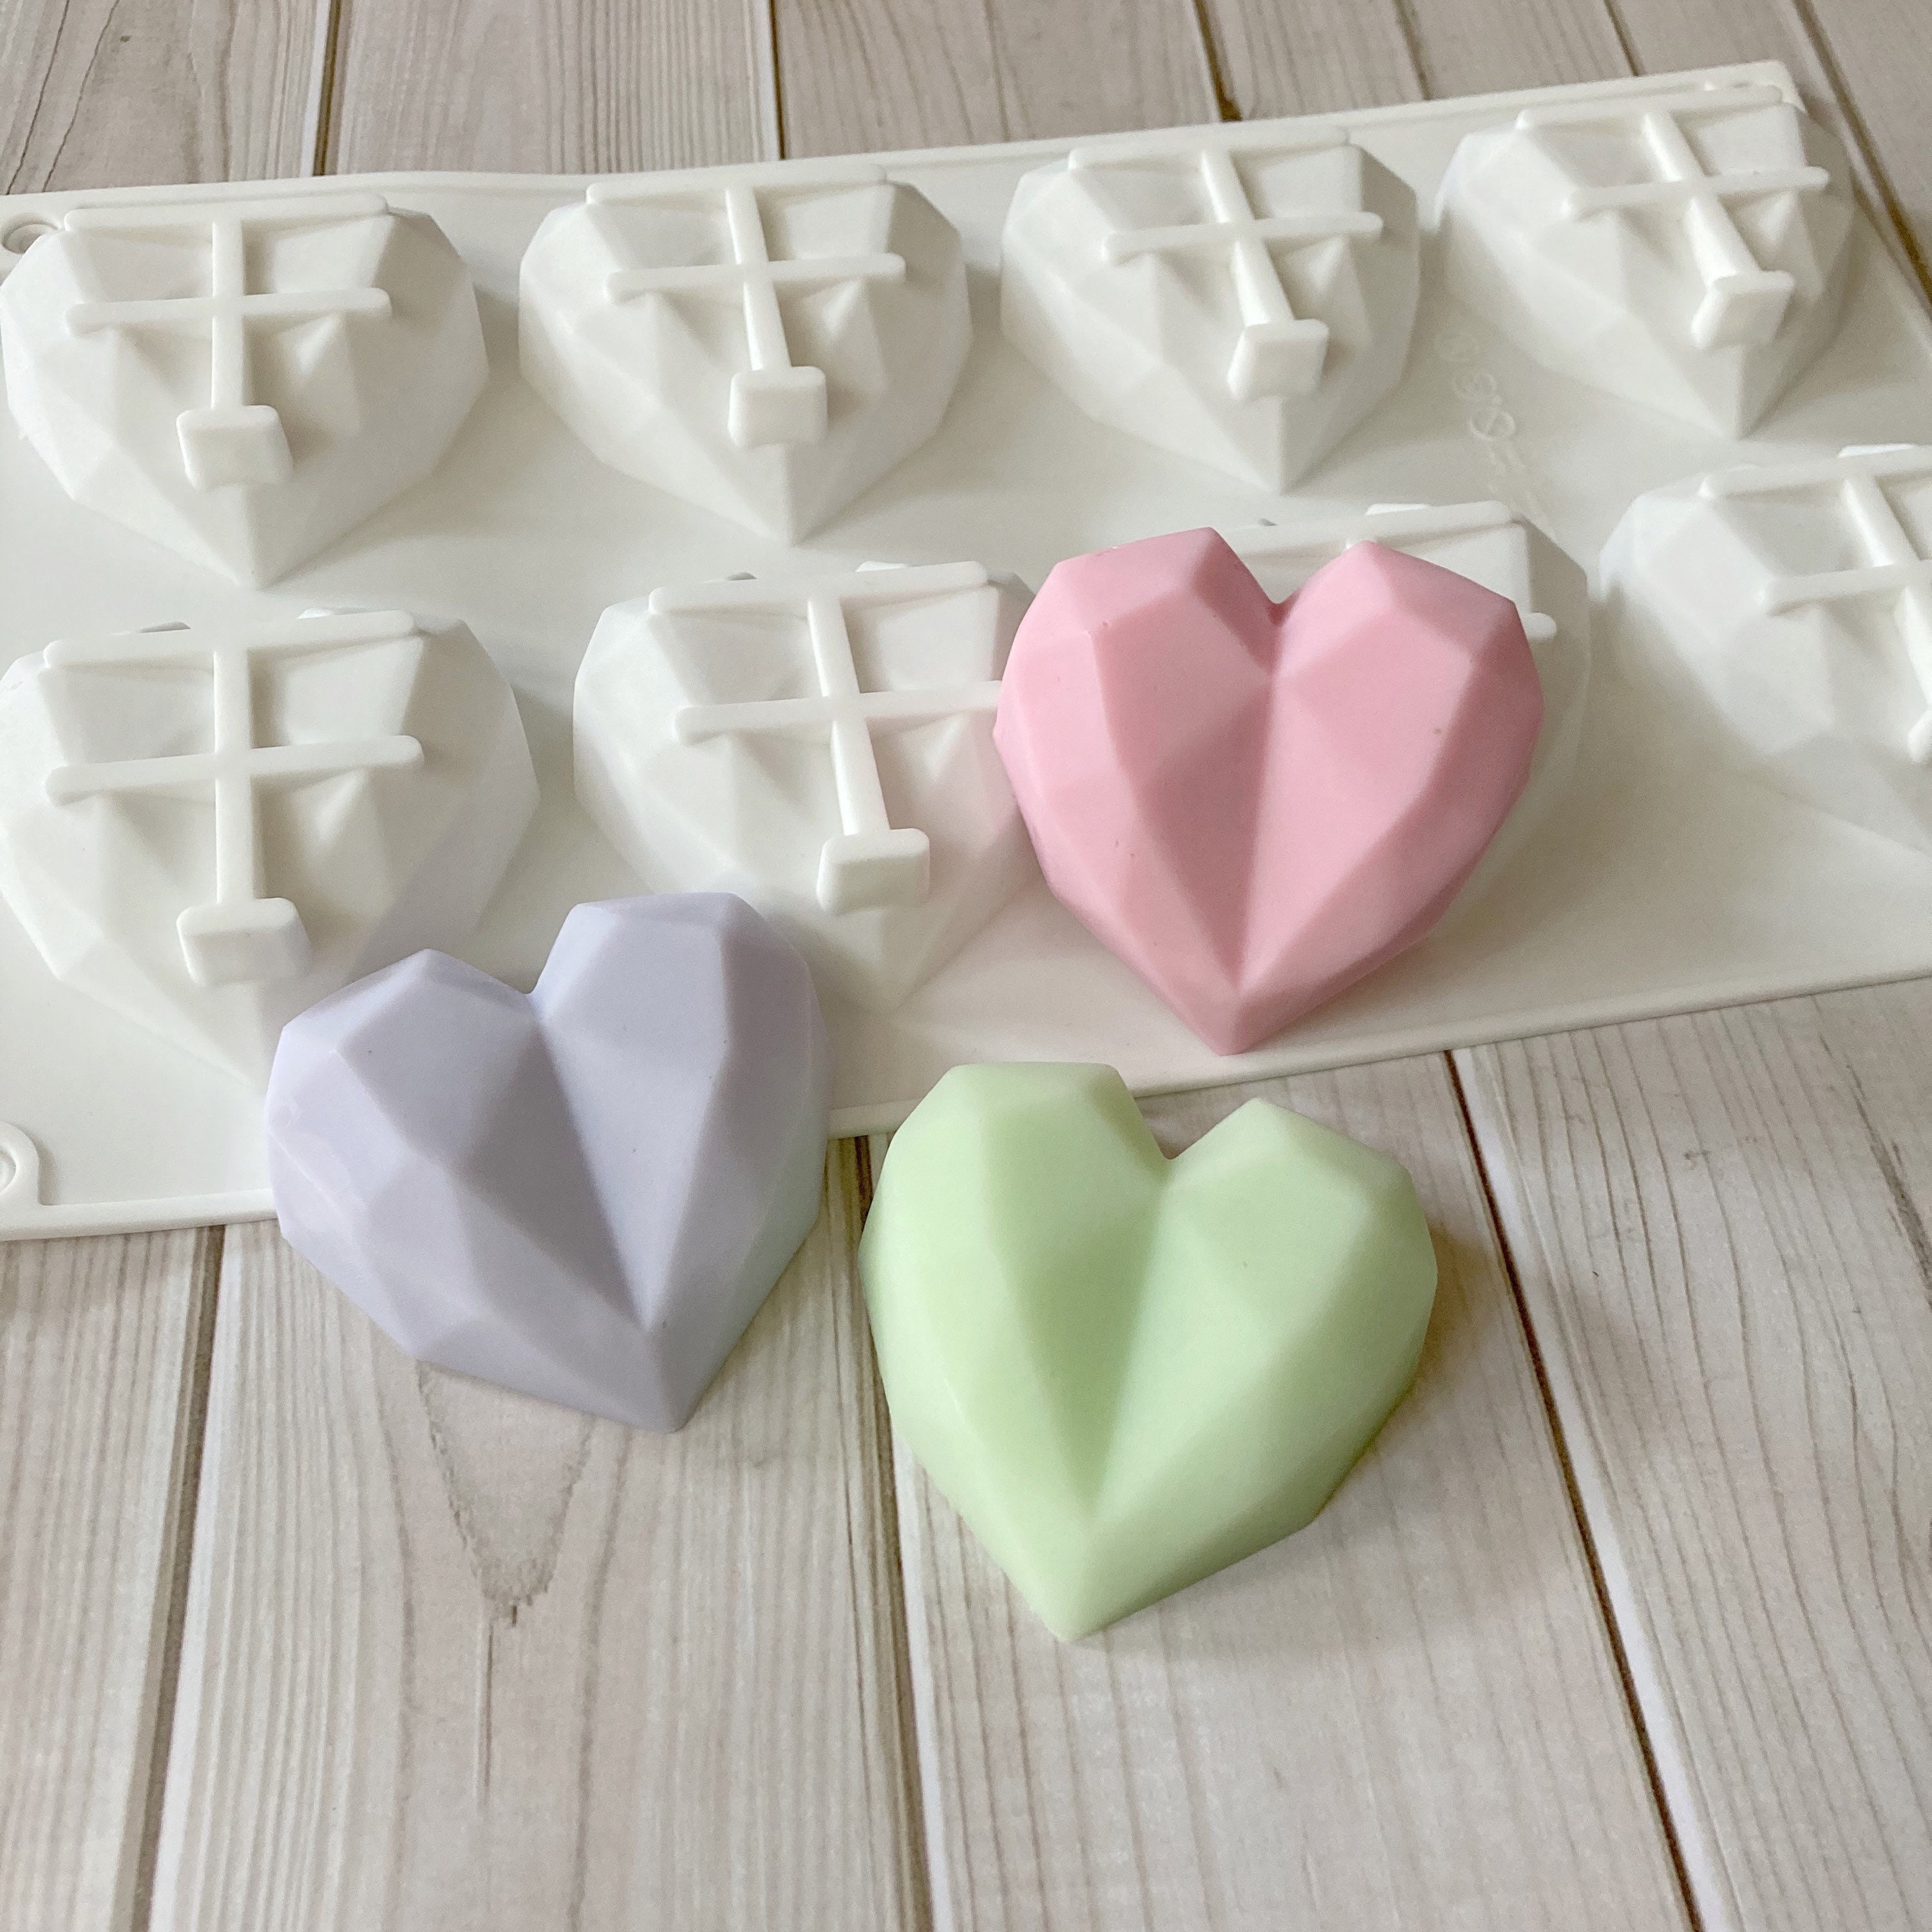 FRAMED HEART Soap Mold, Heat Safe Silicone, 6-4oz Cavities, DIY